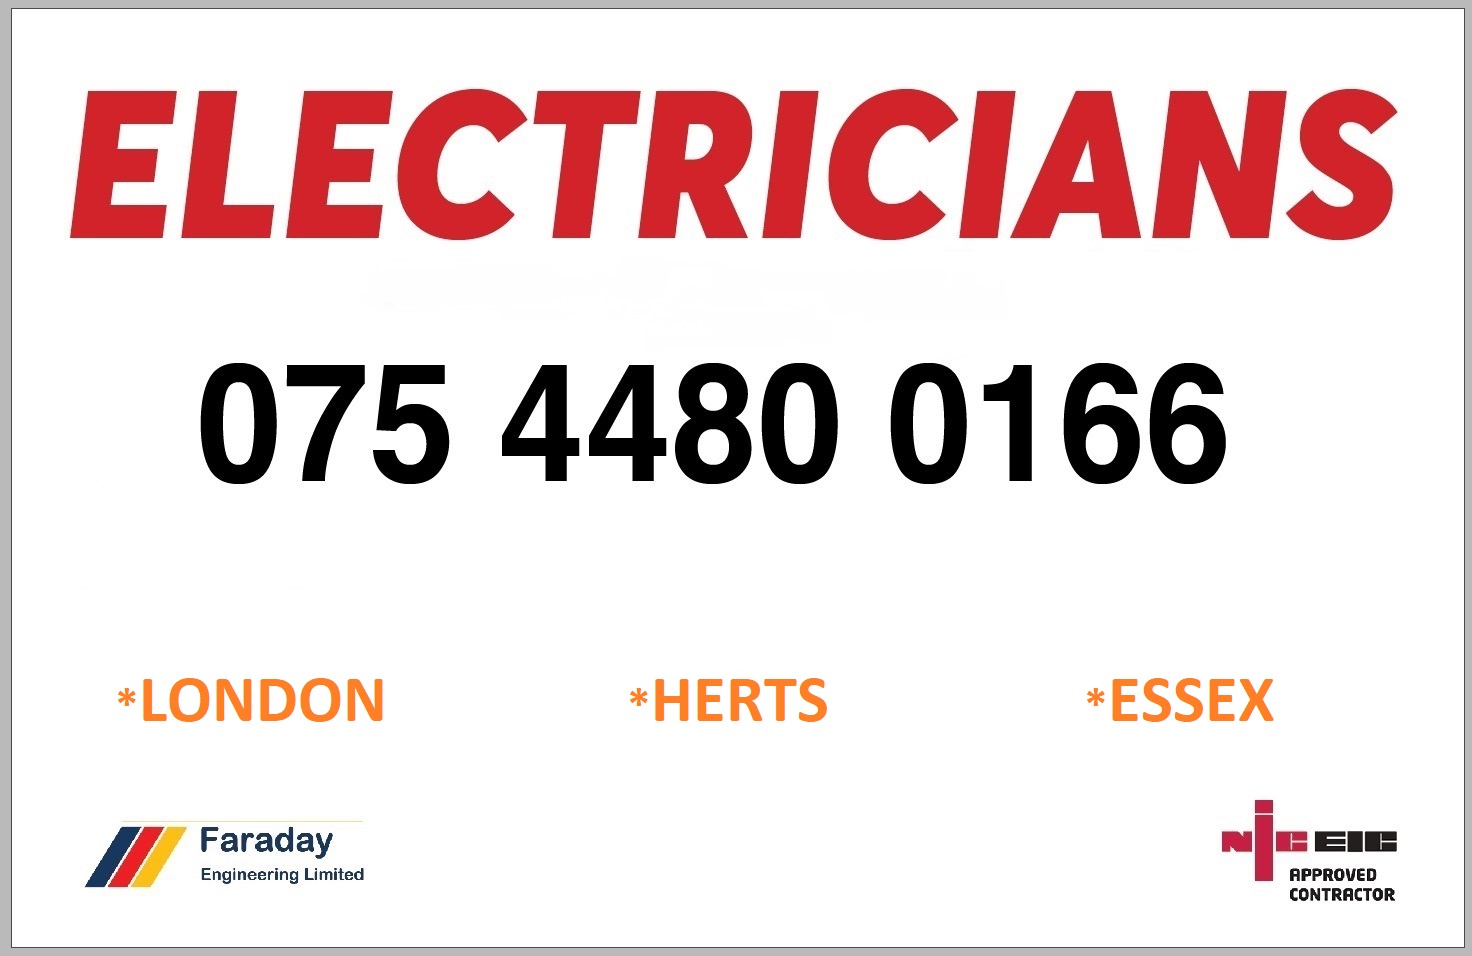 Logo of Faraday Engineering Limited Electricians And Electrical Contractors In Waltham Cross, Hertfordshire